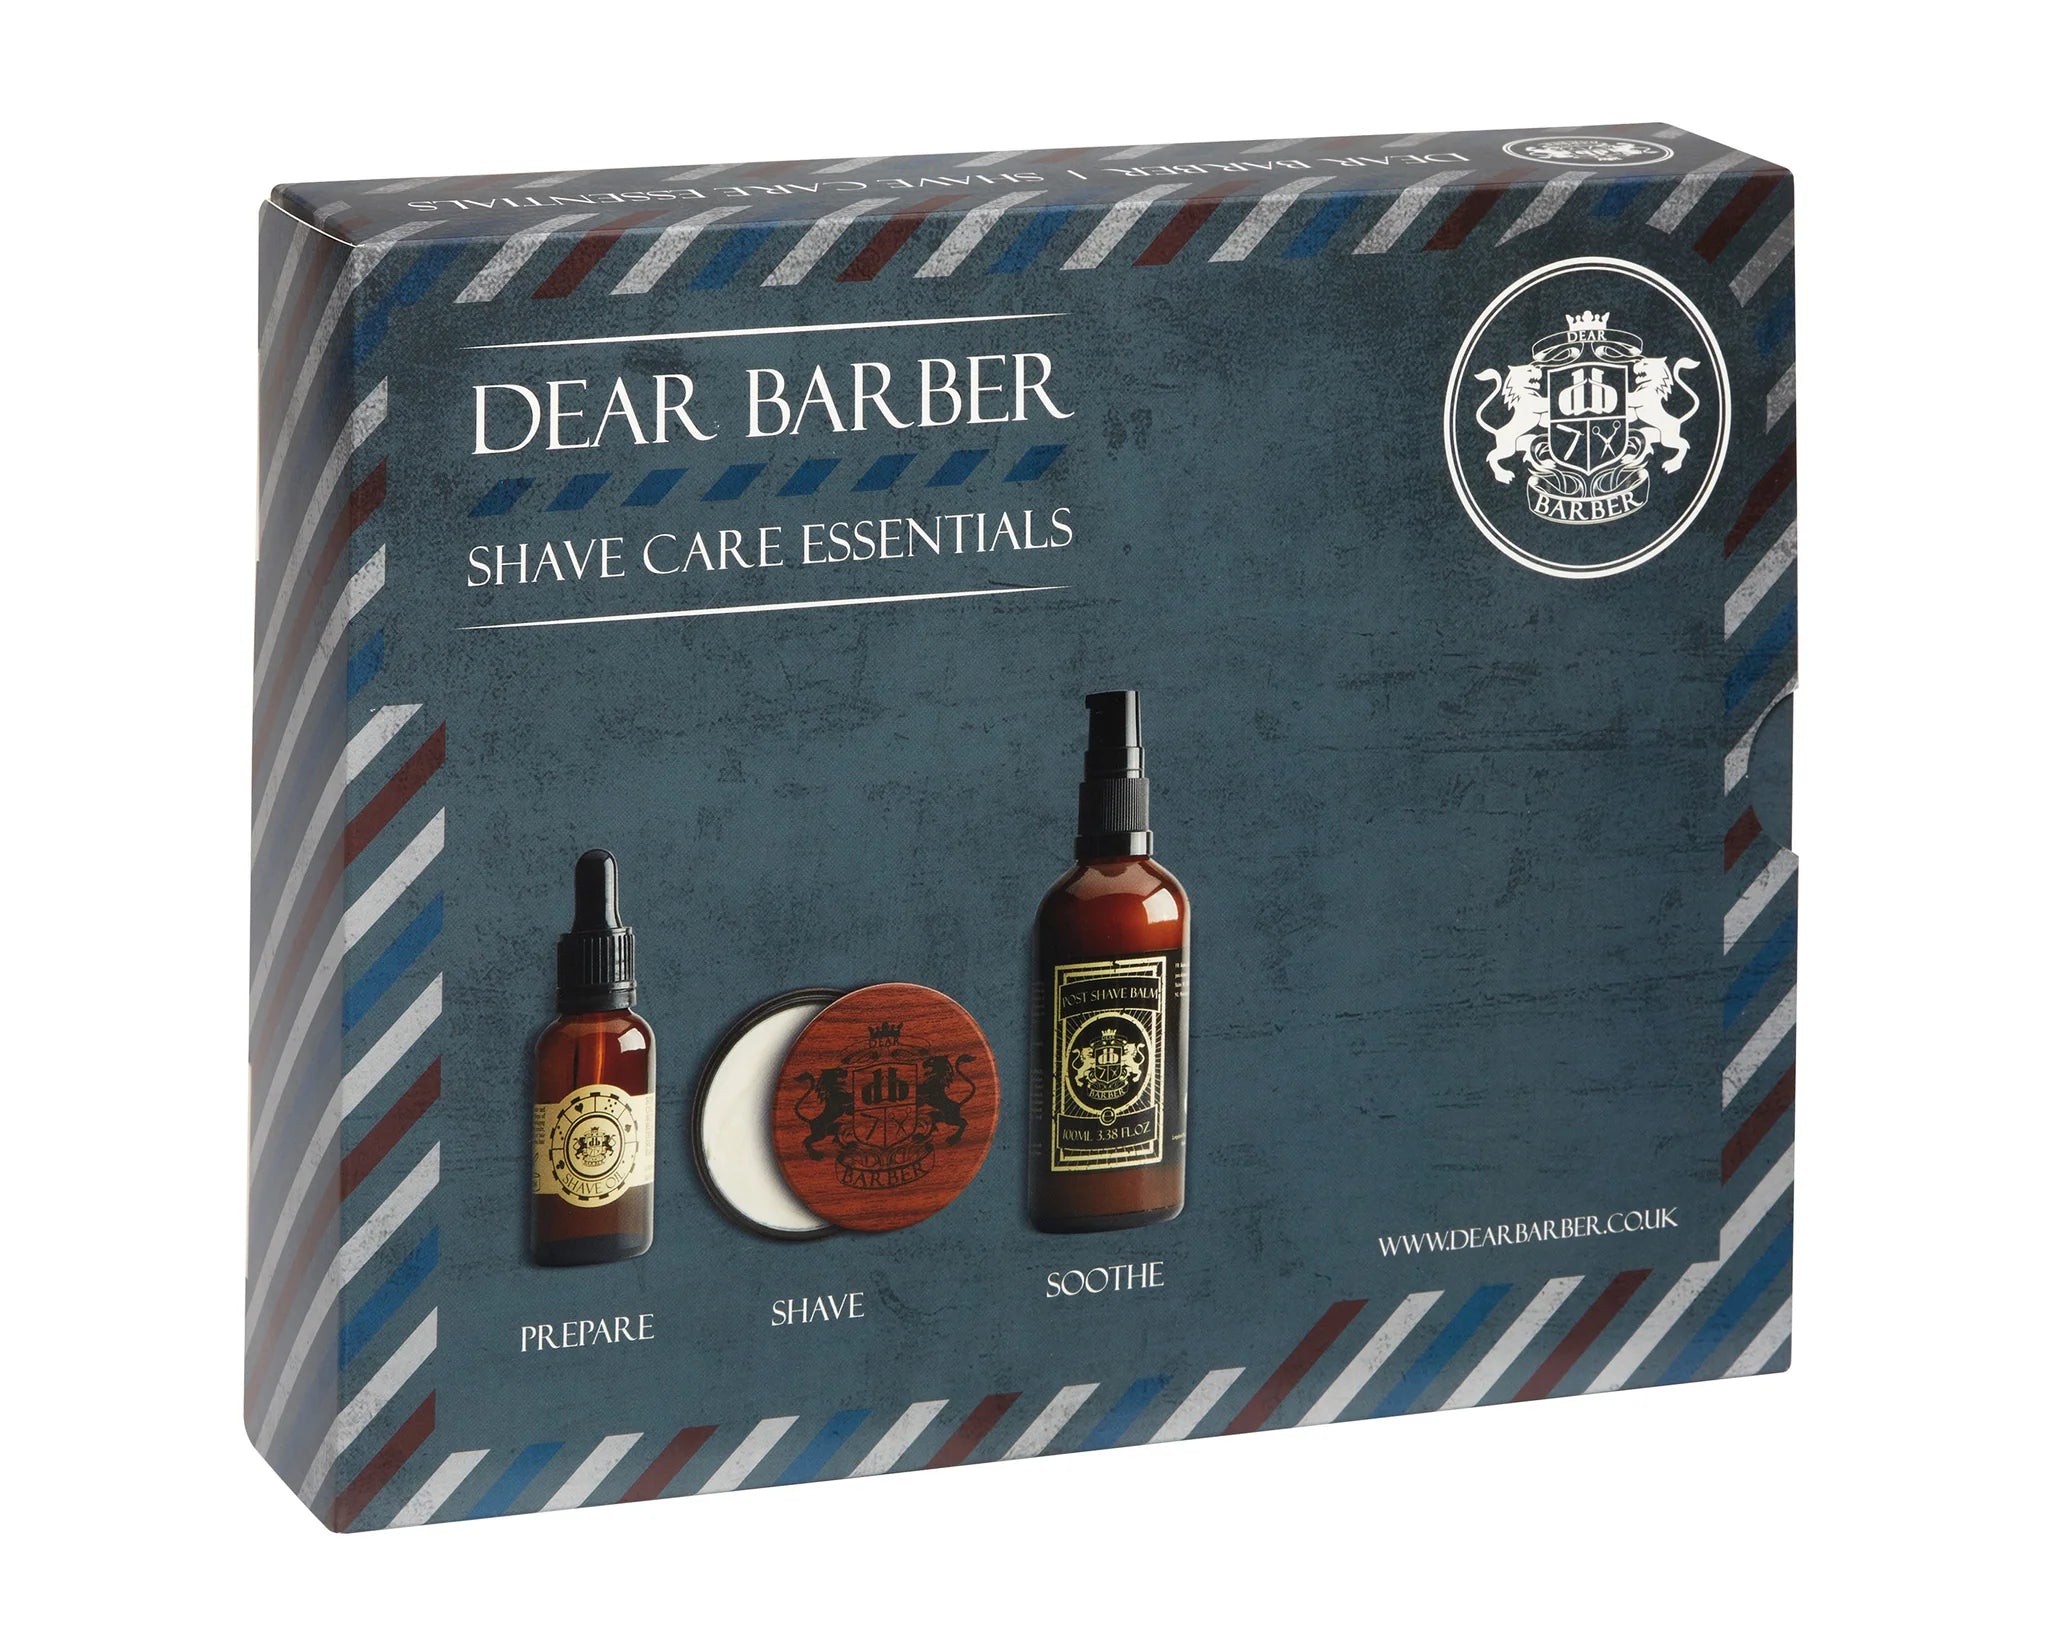 Shave Care Essentials | Dear Barber